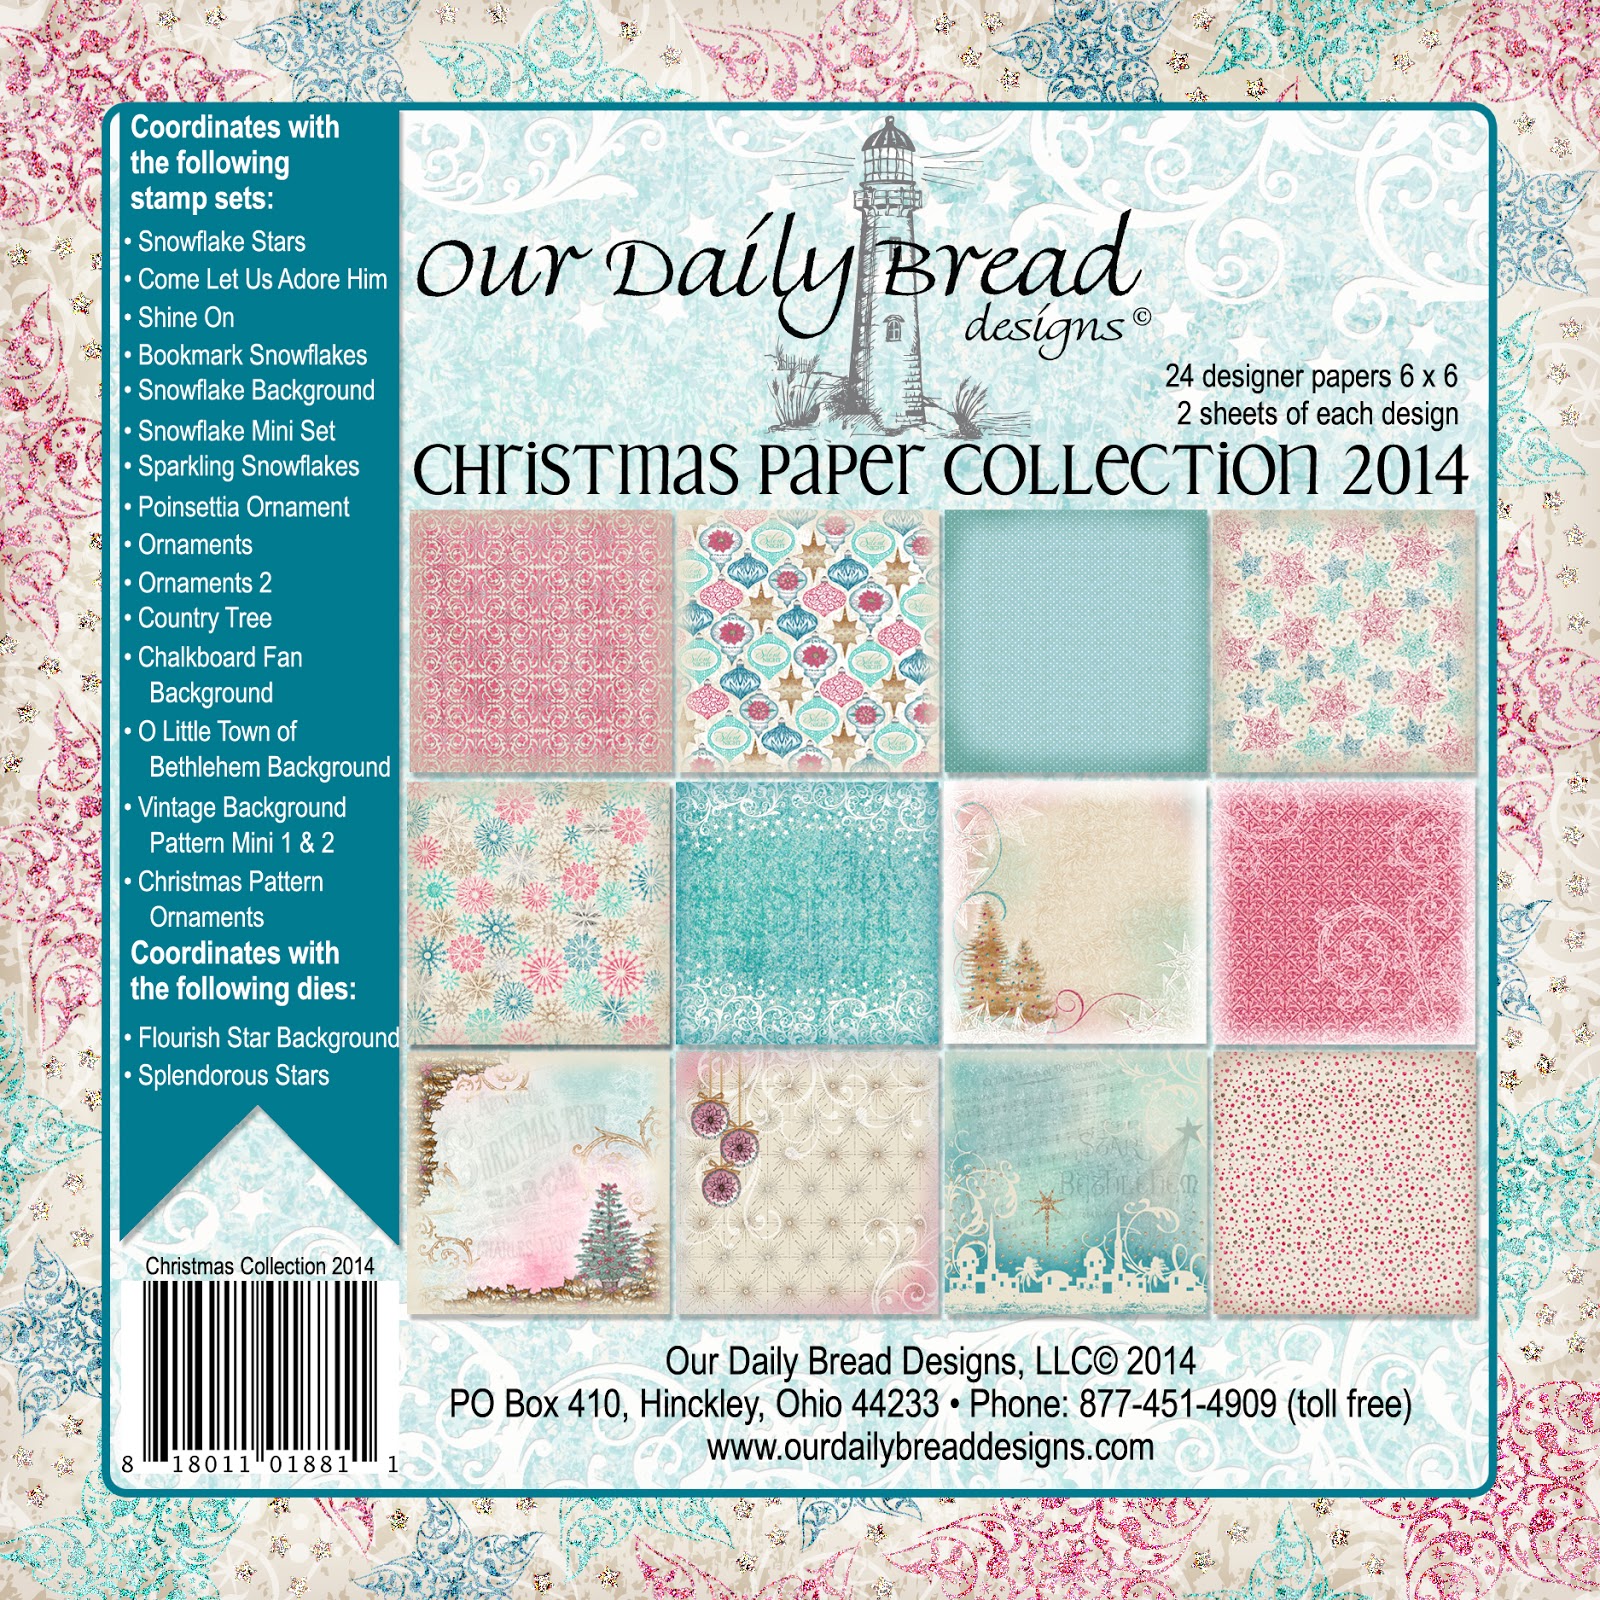 https://www.ourdailybreaddesigns.com/index.php/christmas-collection-2014-6x6-paper-pad.html